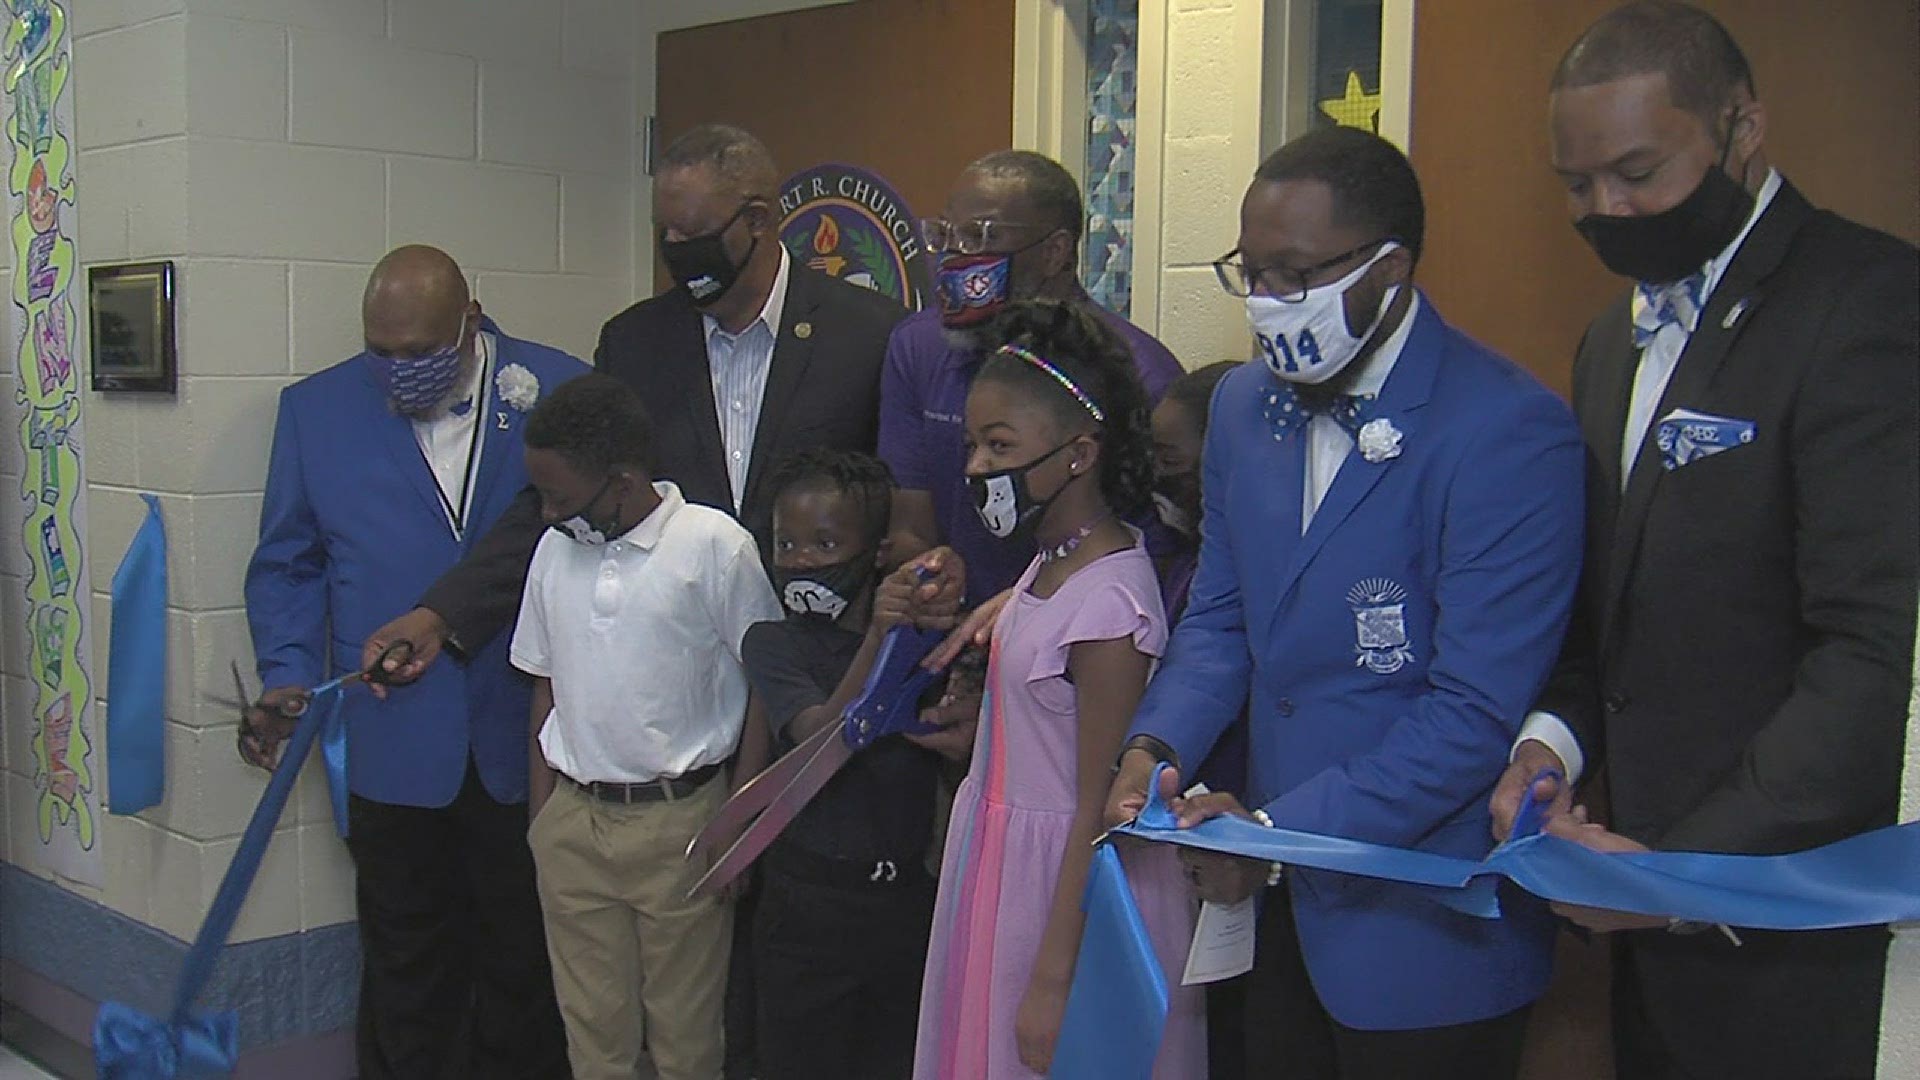 The store was dedicated to the Tau Iota Memphis Chapter of Phi Beta Sigma Fraternity, who donated $10,000 to the effort.